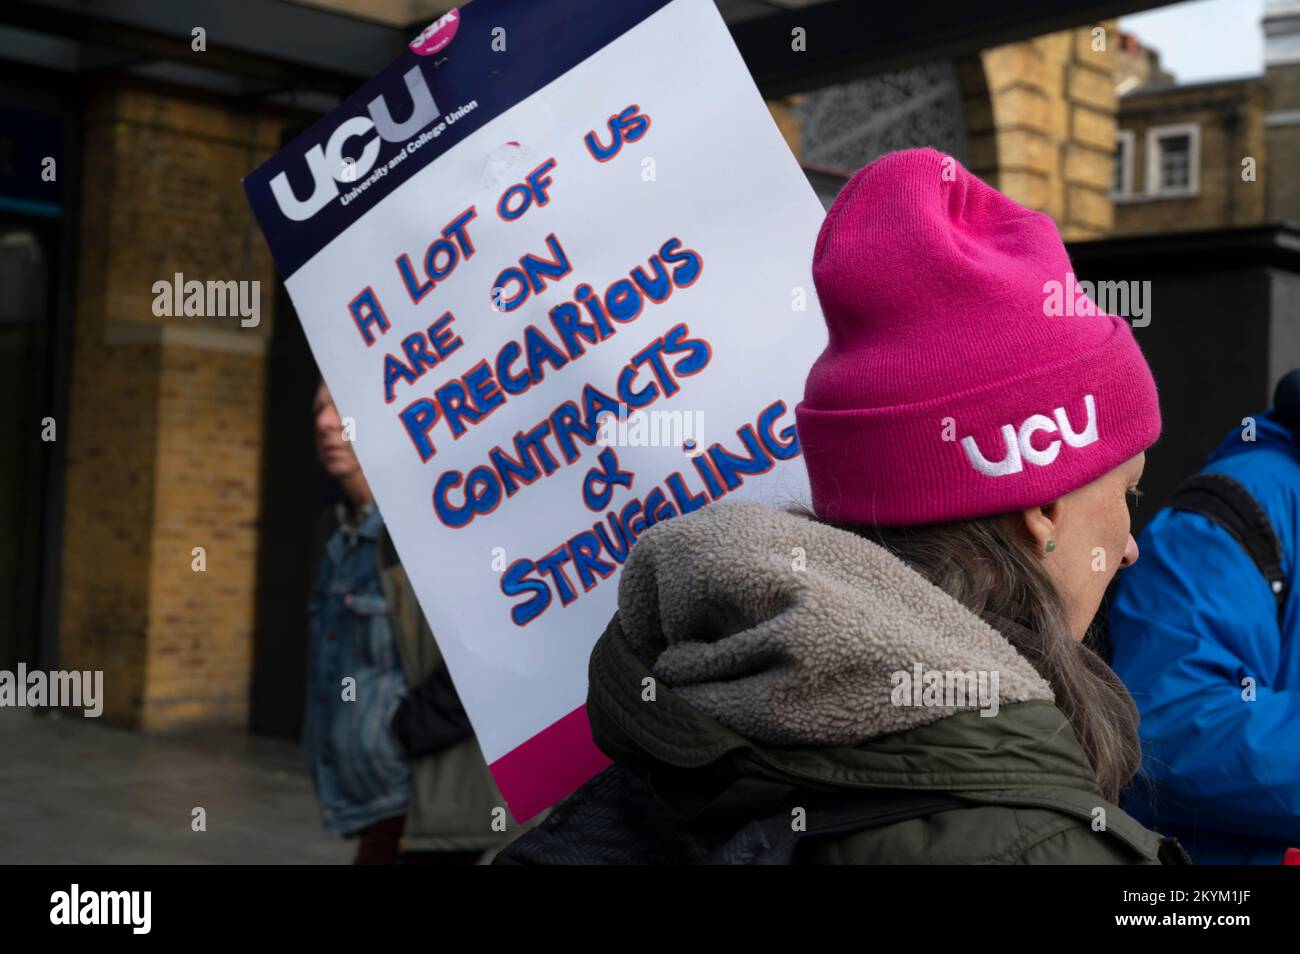 On November 30th 2022 a large rally of striking university and college staff took place in front of Kings Cross station demanding  a fair pay deal and Stock Photo